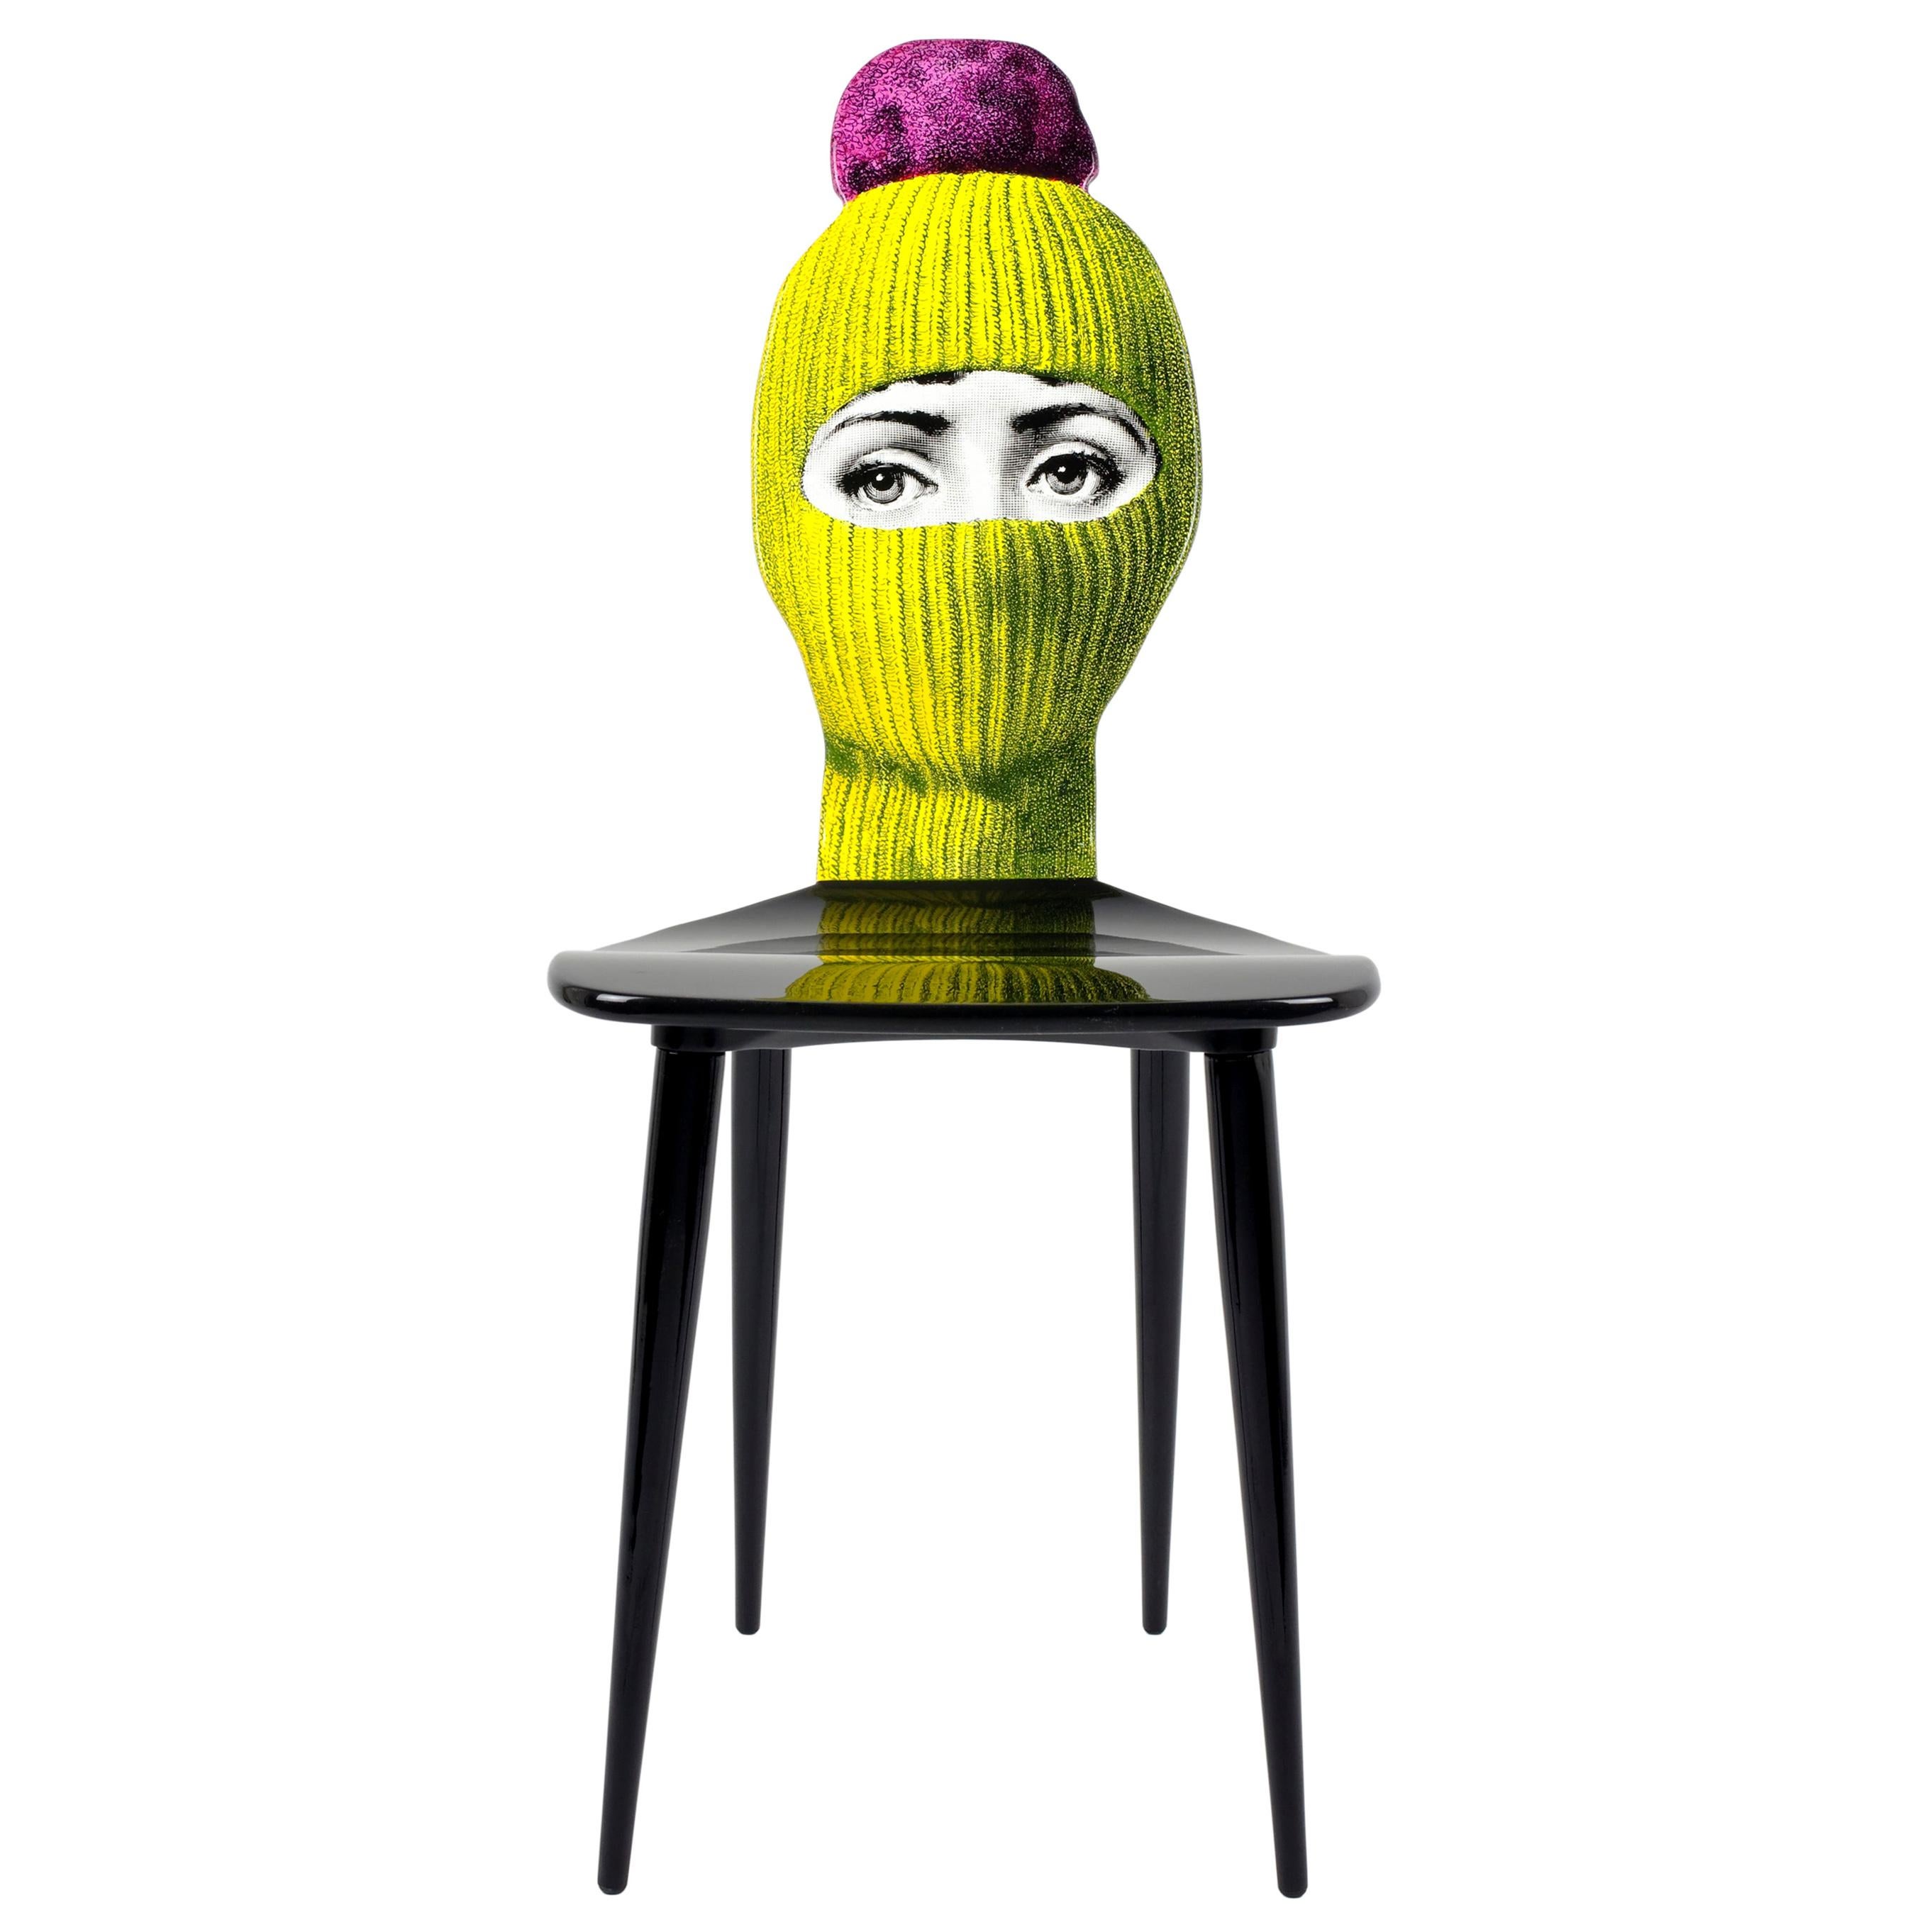 Fornasetti Chair Lux Gstaad Yellow Ponpon Bright Pink Hand Painted Wood